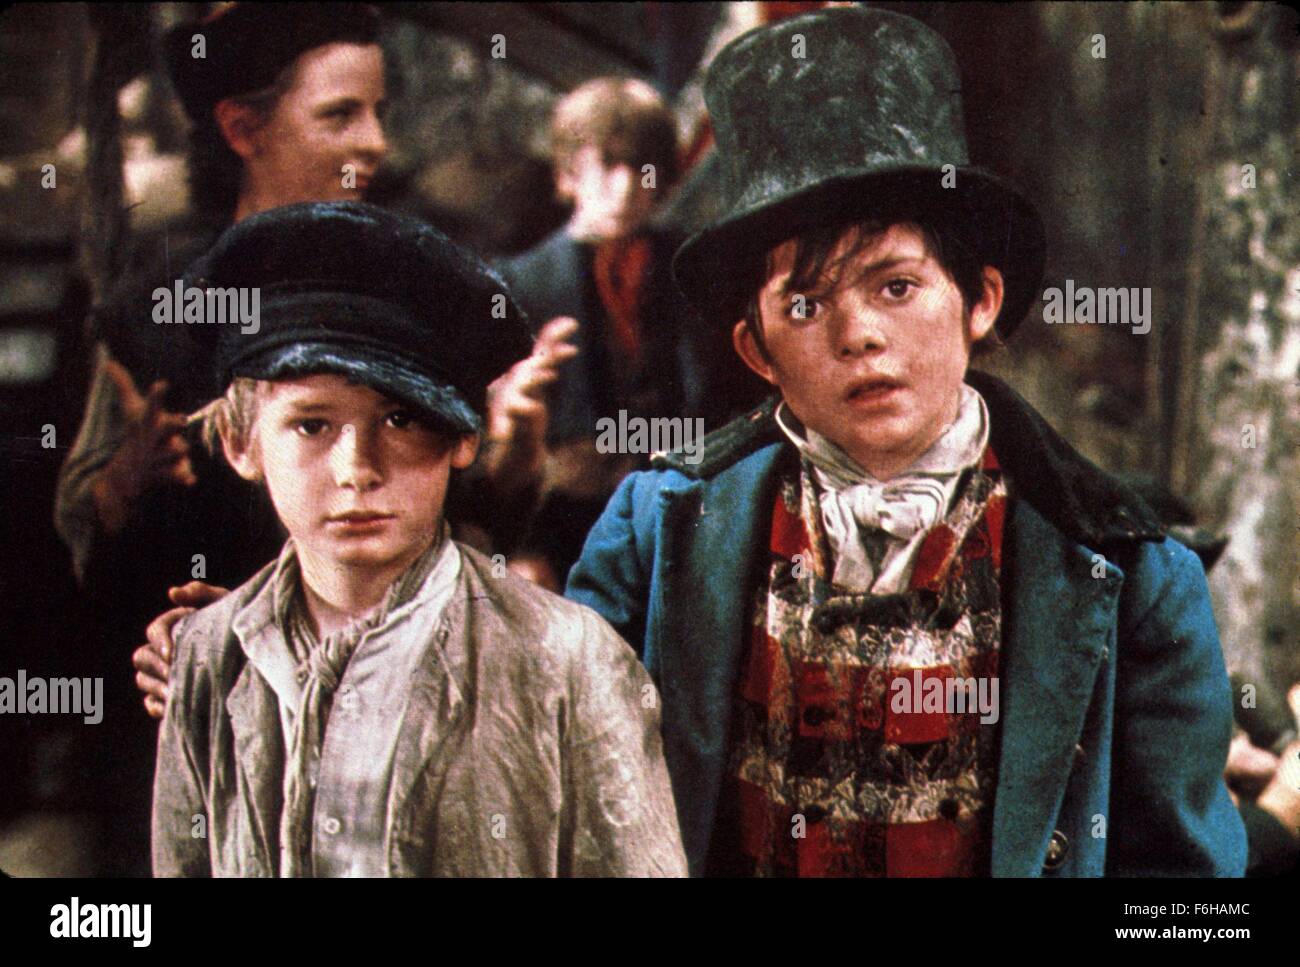 1968, Film Title: OLIVER, Pictured: 1968, AWARDS - ACADEMY, BEST PICTURE, MARK LESTER, JACK WILD, POVERTY, ORPHAN, POOR, DIRTY, SHABBY, HAT, BOYS. (Credit Image: SNAP) Stock Photo